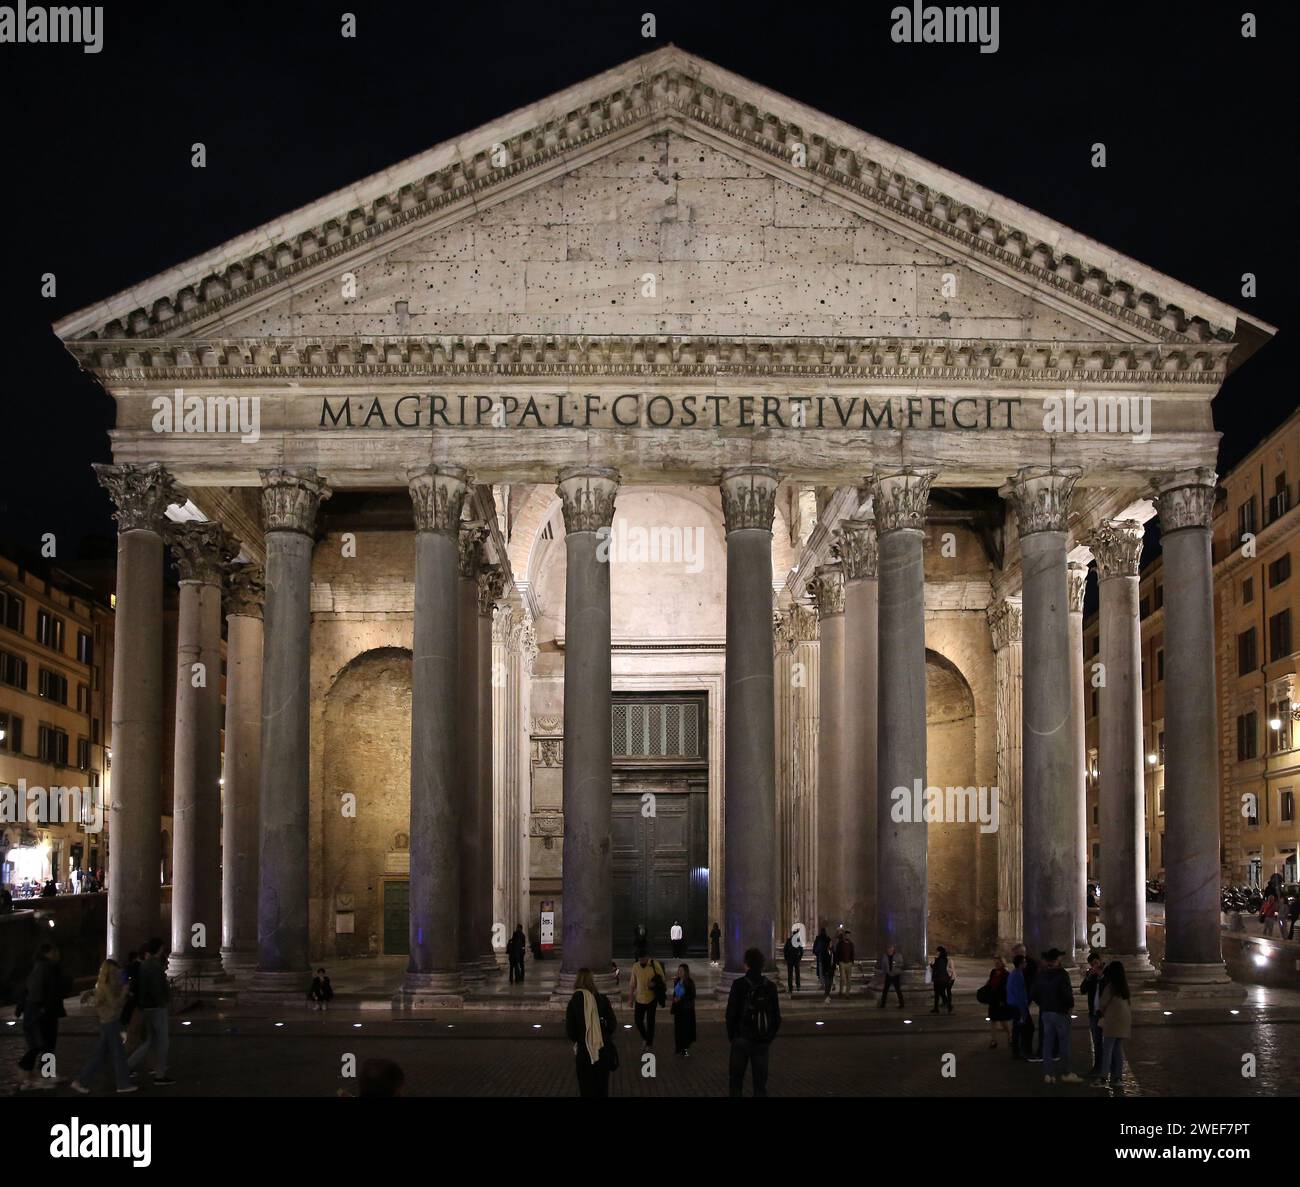 Italy. Rome. Pantheon. Ancient Roman temple. View of Facade. 2nd century. Stock Photo